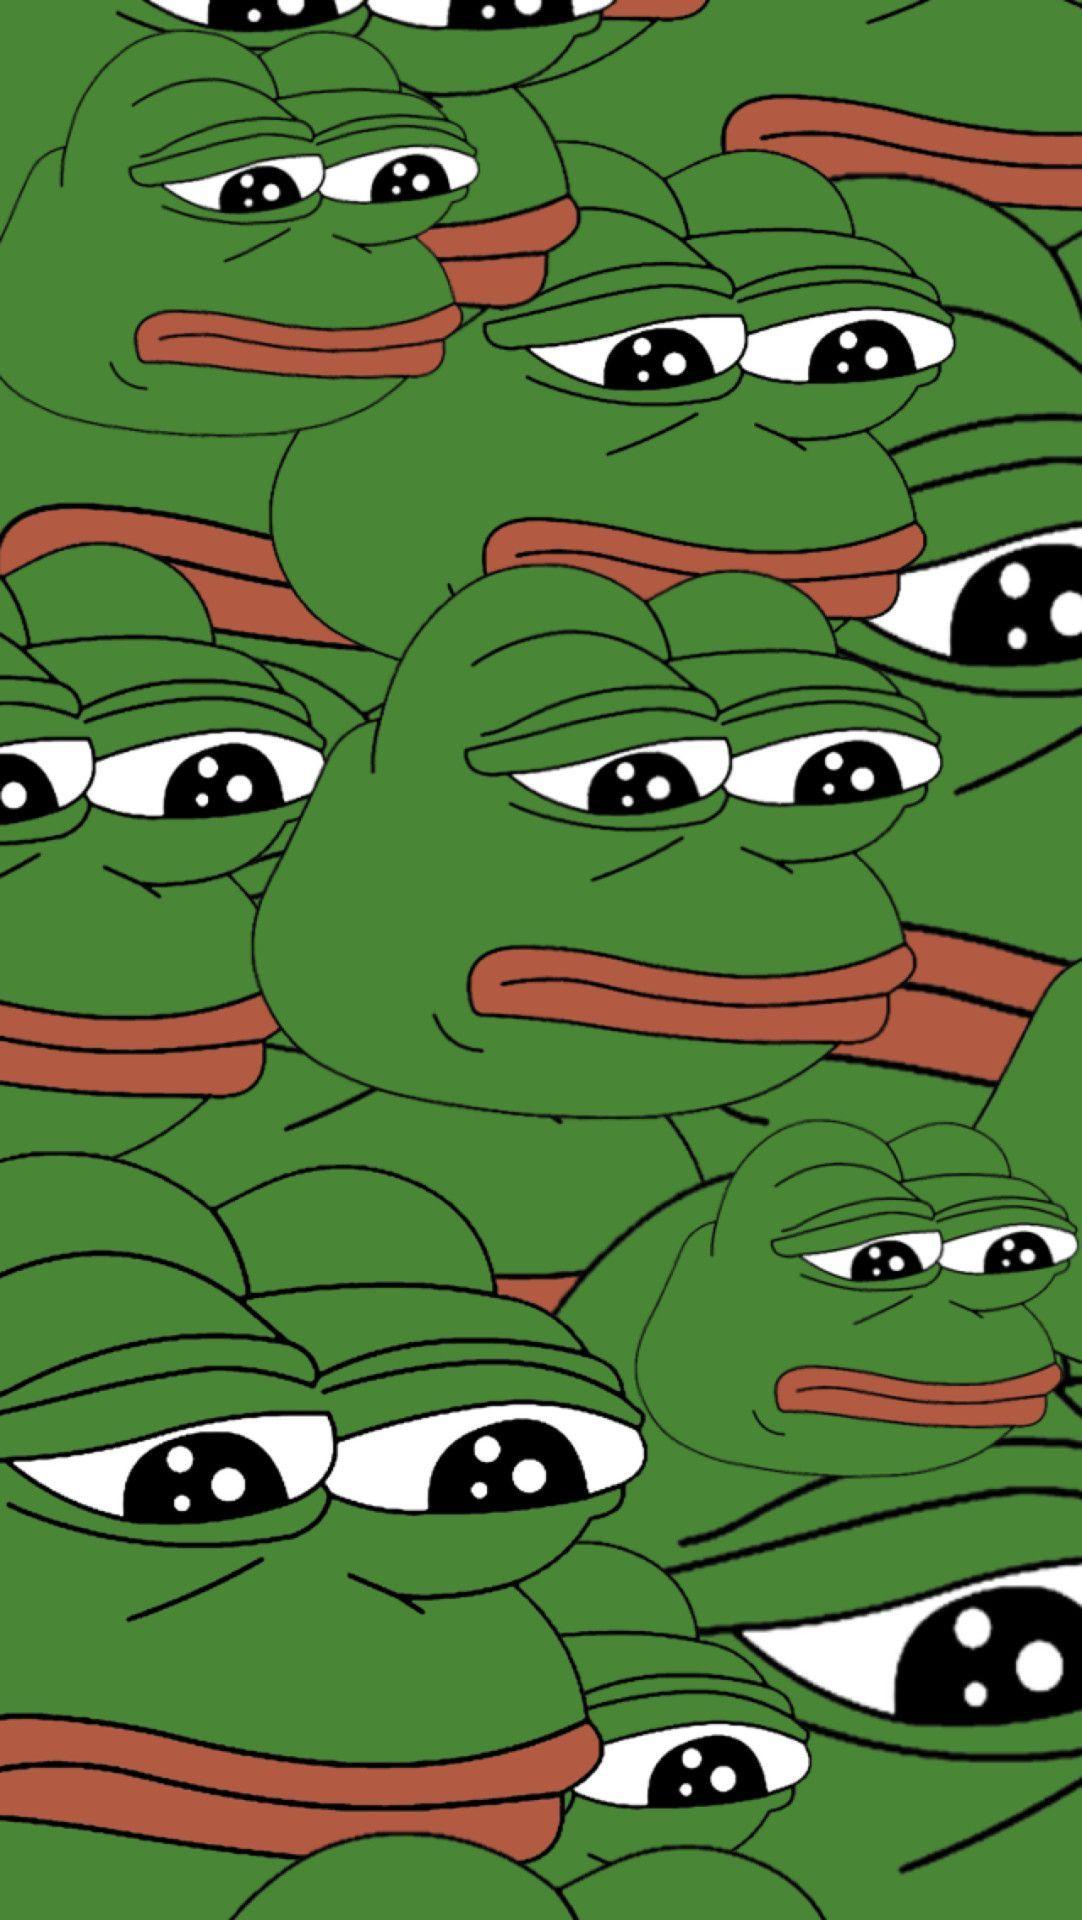 Pepe the Frog Wallpaper Free Pepe the Frog